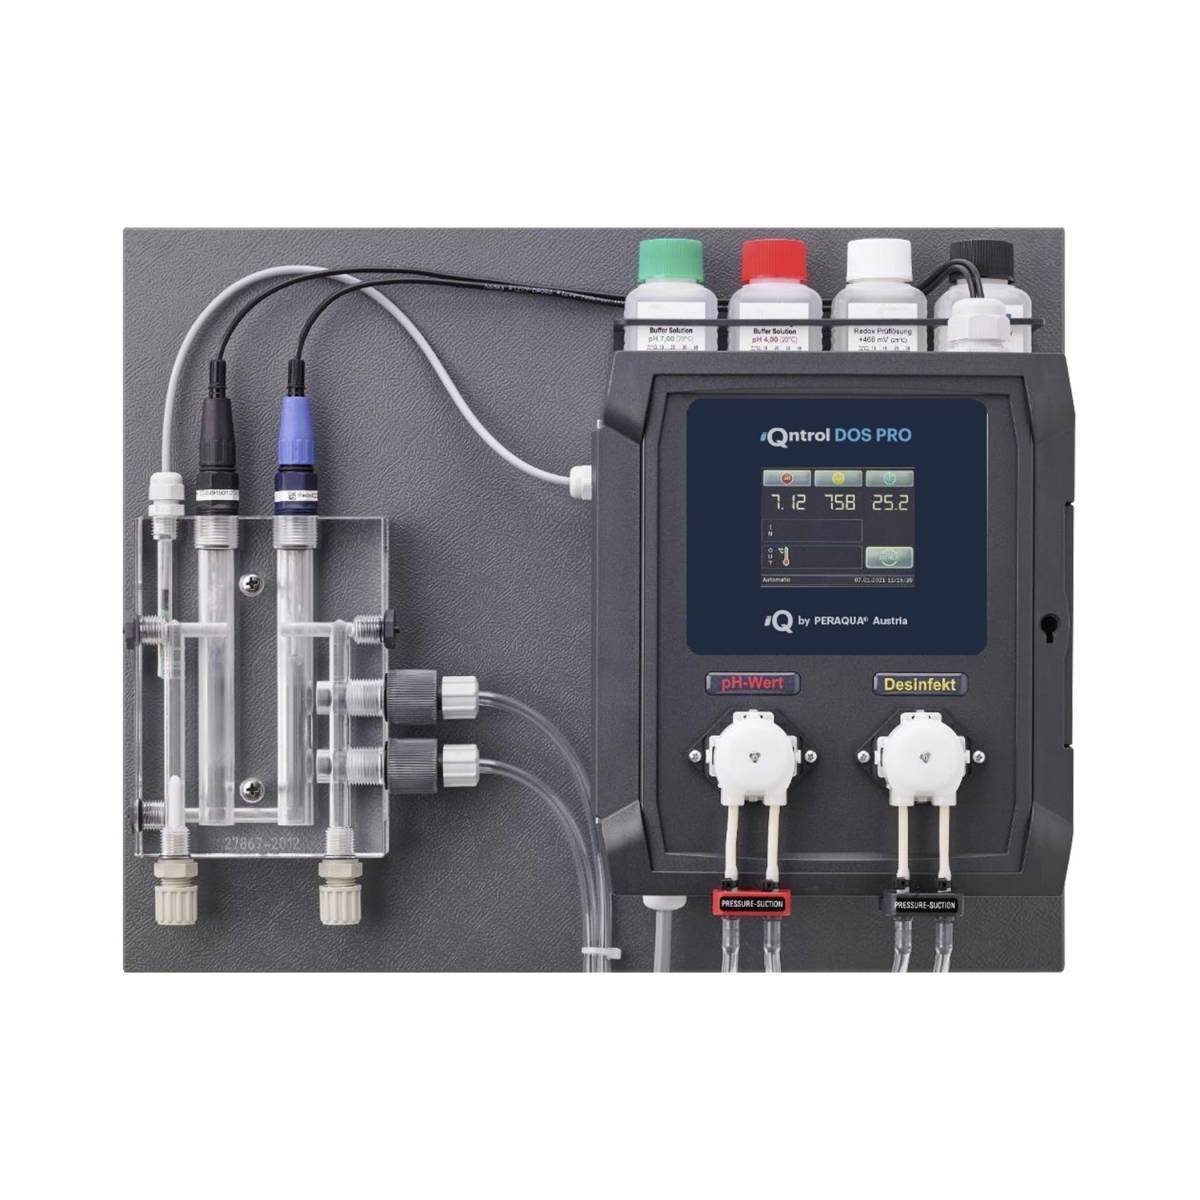 iQntrol dosing system DOS-PRO measure, control & dosing technology ph / redox for private pools for disinfection, pH-value and temperature, 3,2” touch-grafic display, mounting plate
 iQntrol dosing system DOS-PRO measure, control & dosing technology ph / redox for private pools for disinfection, pH-value and temperature, 3,2” touch-grafic display, mounting plate
